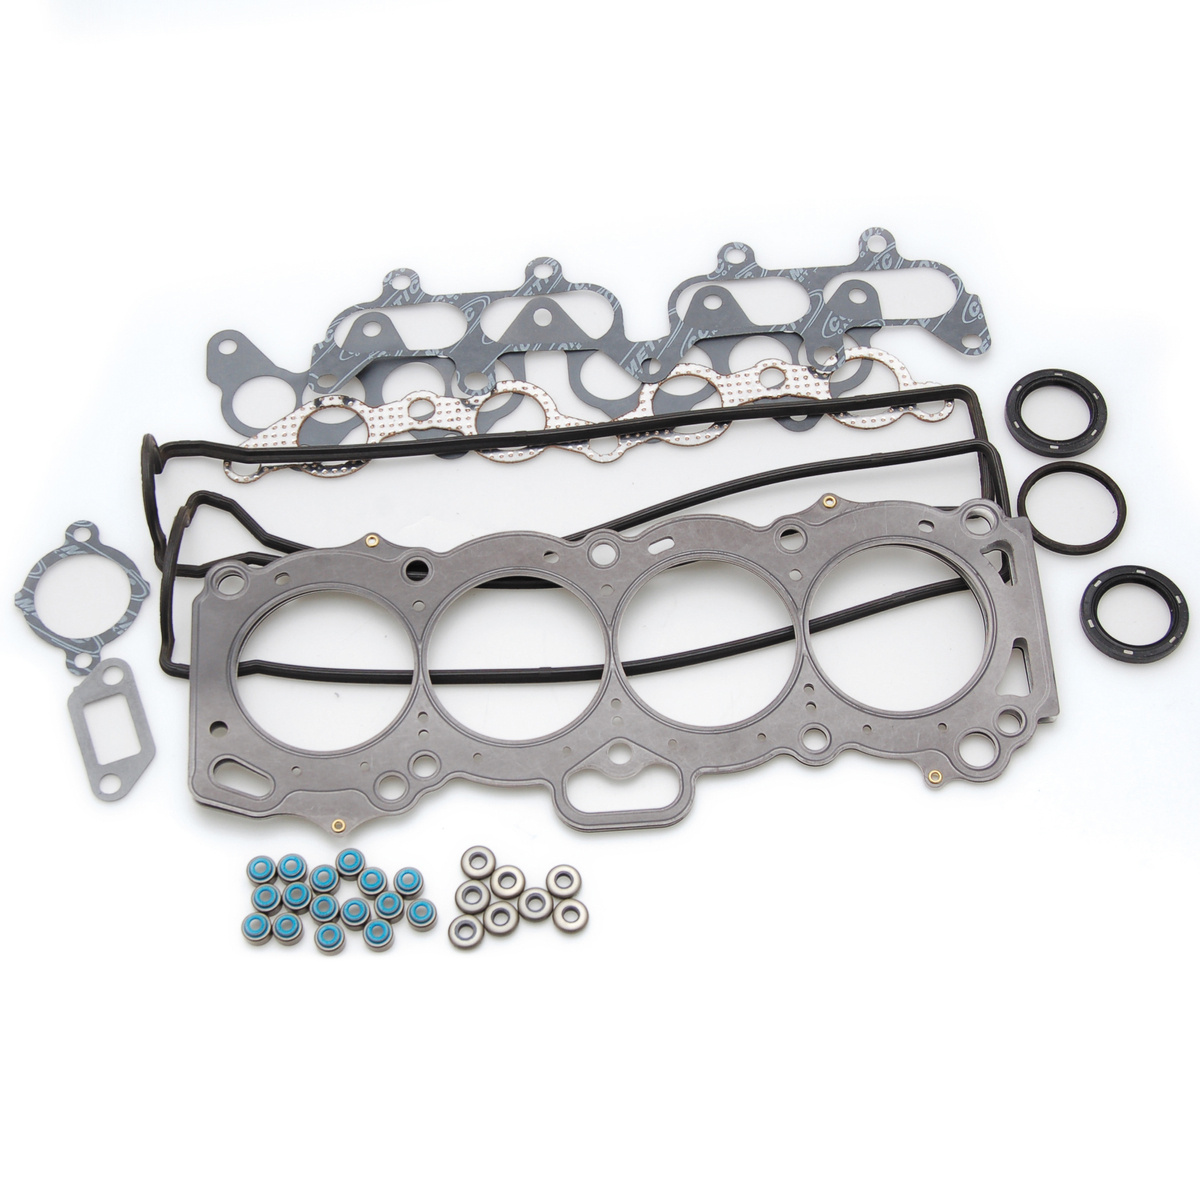 Cylinder Head Gasket Toyota 4A-GE Top End Gasket Kit, 83mm Bore, .040" MLS , 16-Valve Cometic PRO2041T-830-040